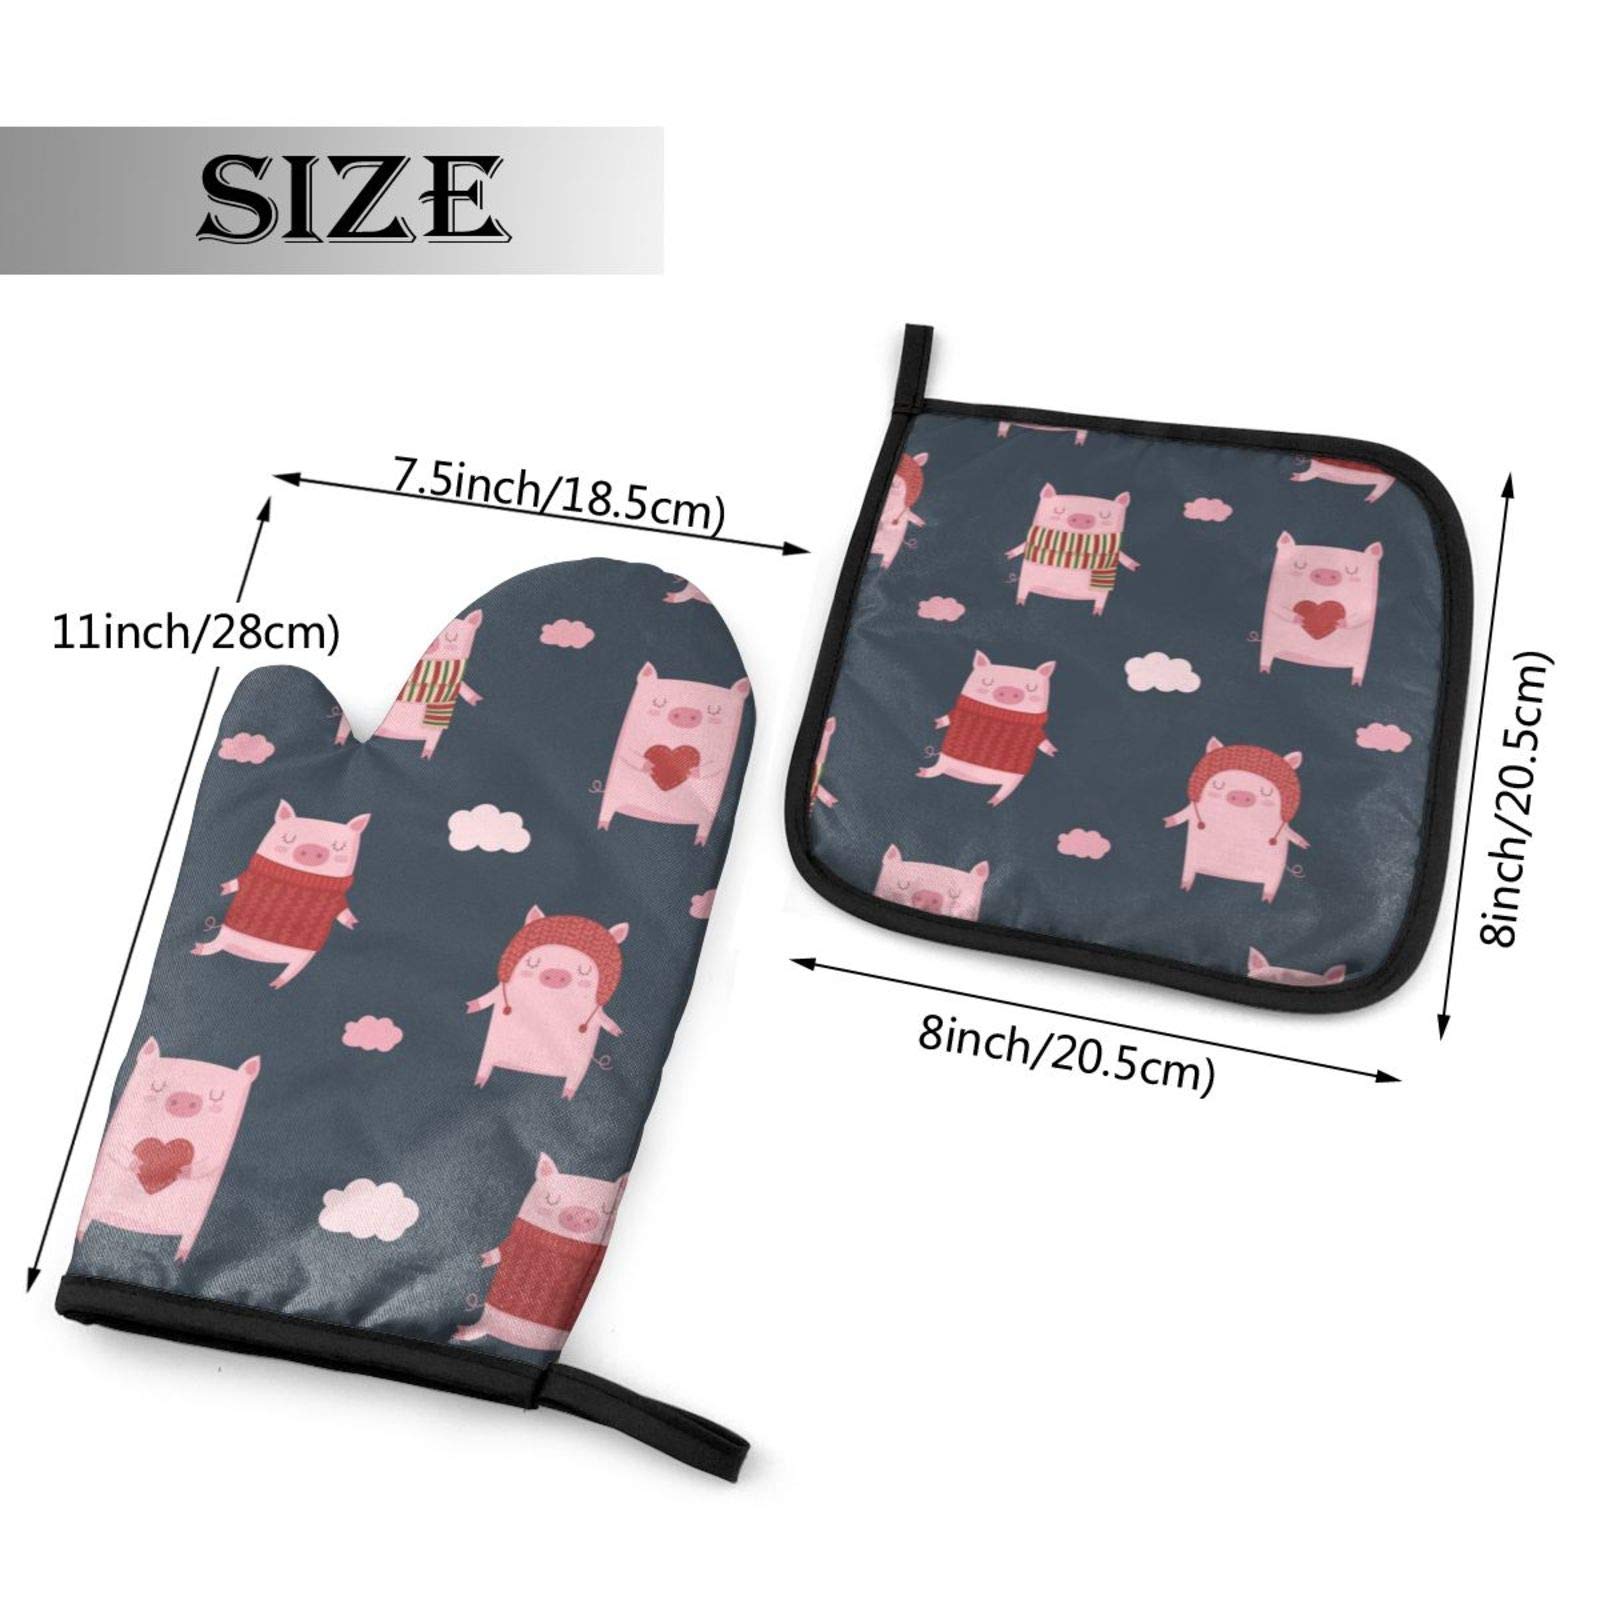 Cute Cartoon Pigs Oven Mitts and Pot Holders Sets Heat Resistant Oven Gloves with Non-Slip Surface for Reusable for Baking BBQ Cooking